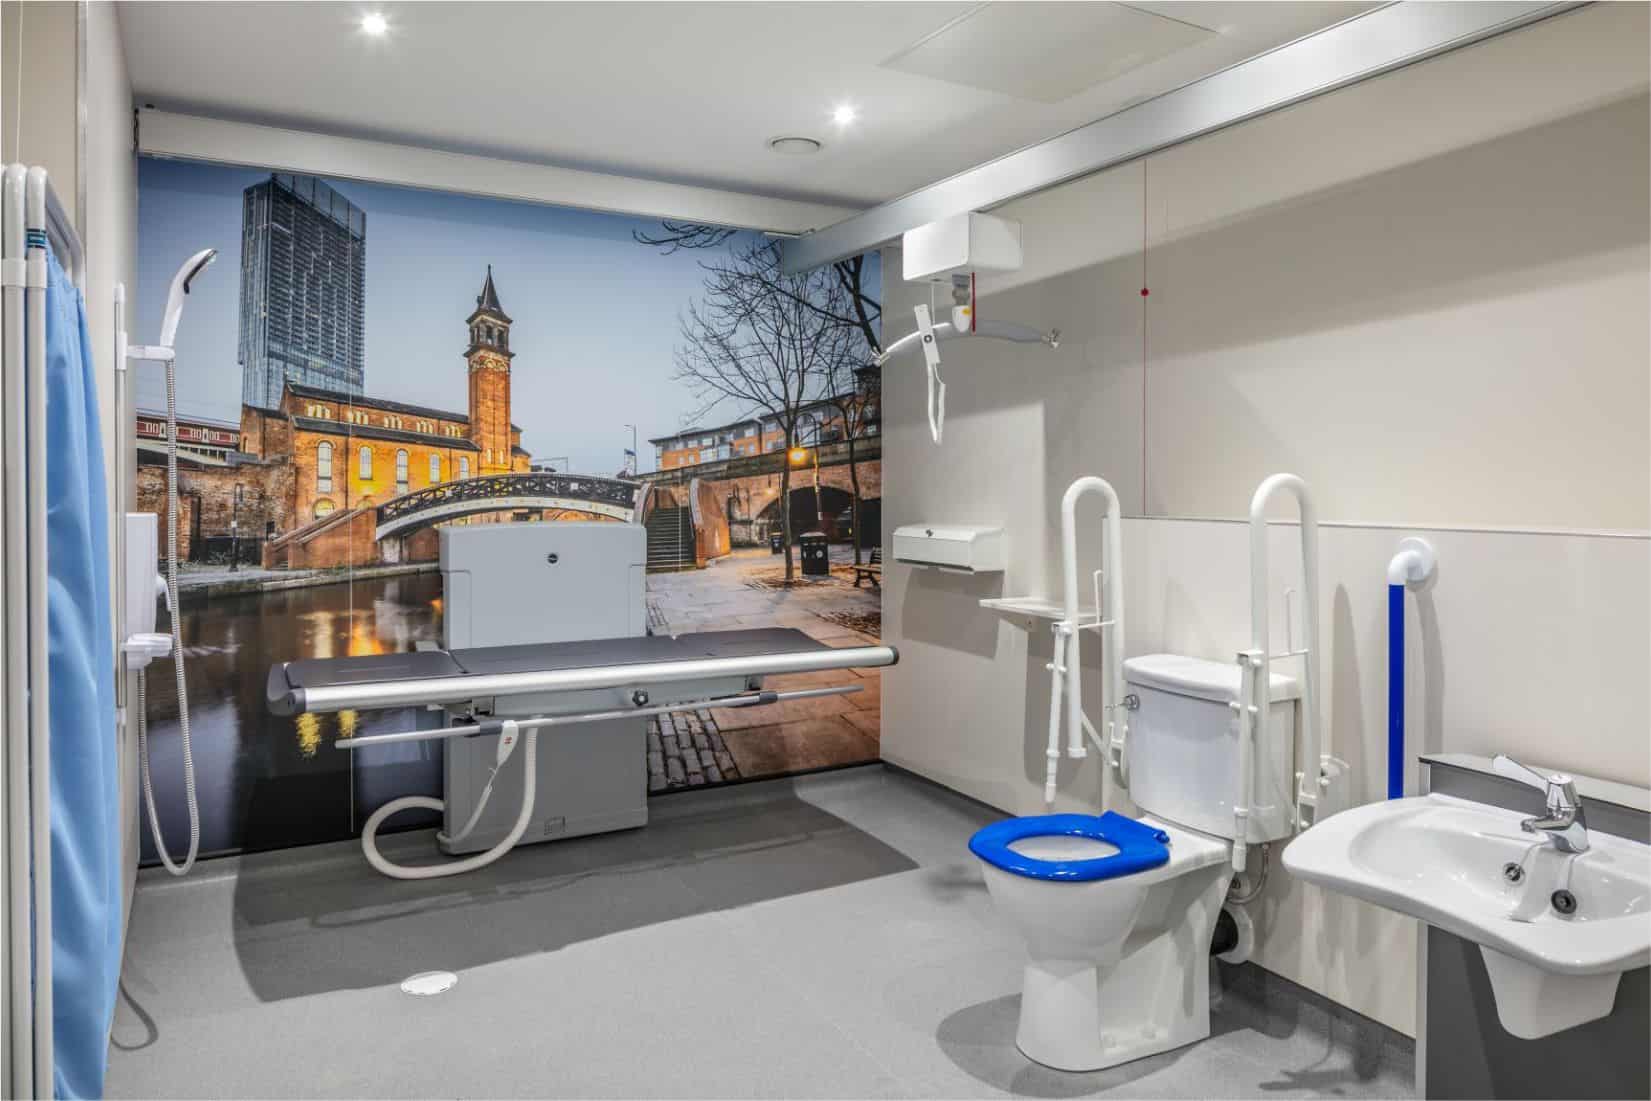 a changing places toilet at manchester airport transport building